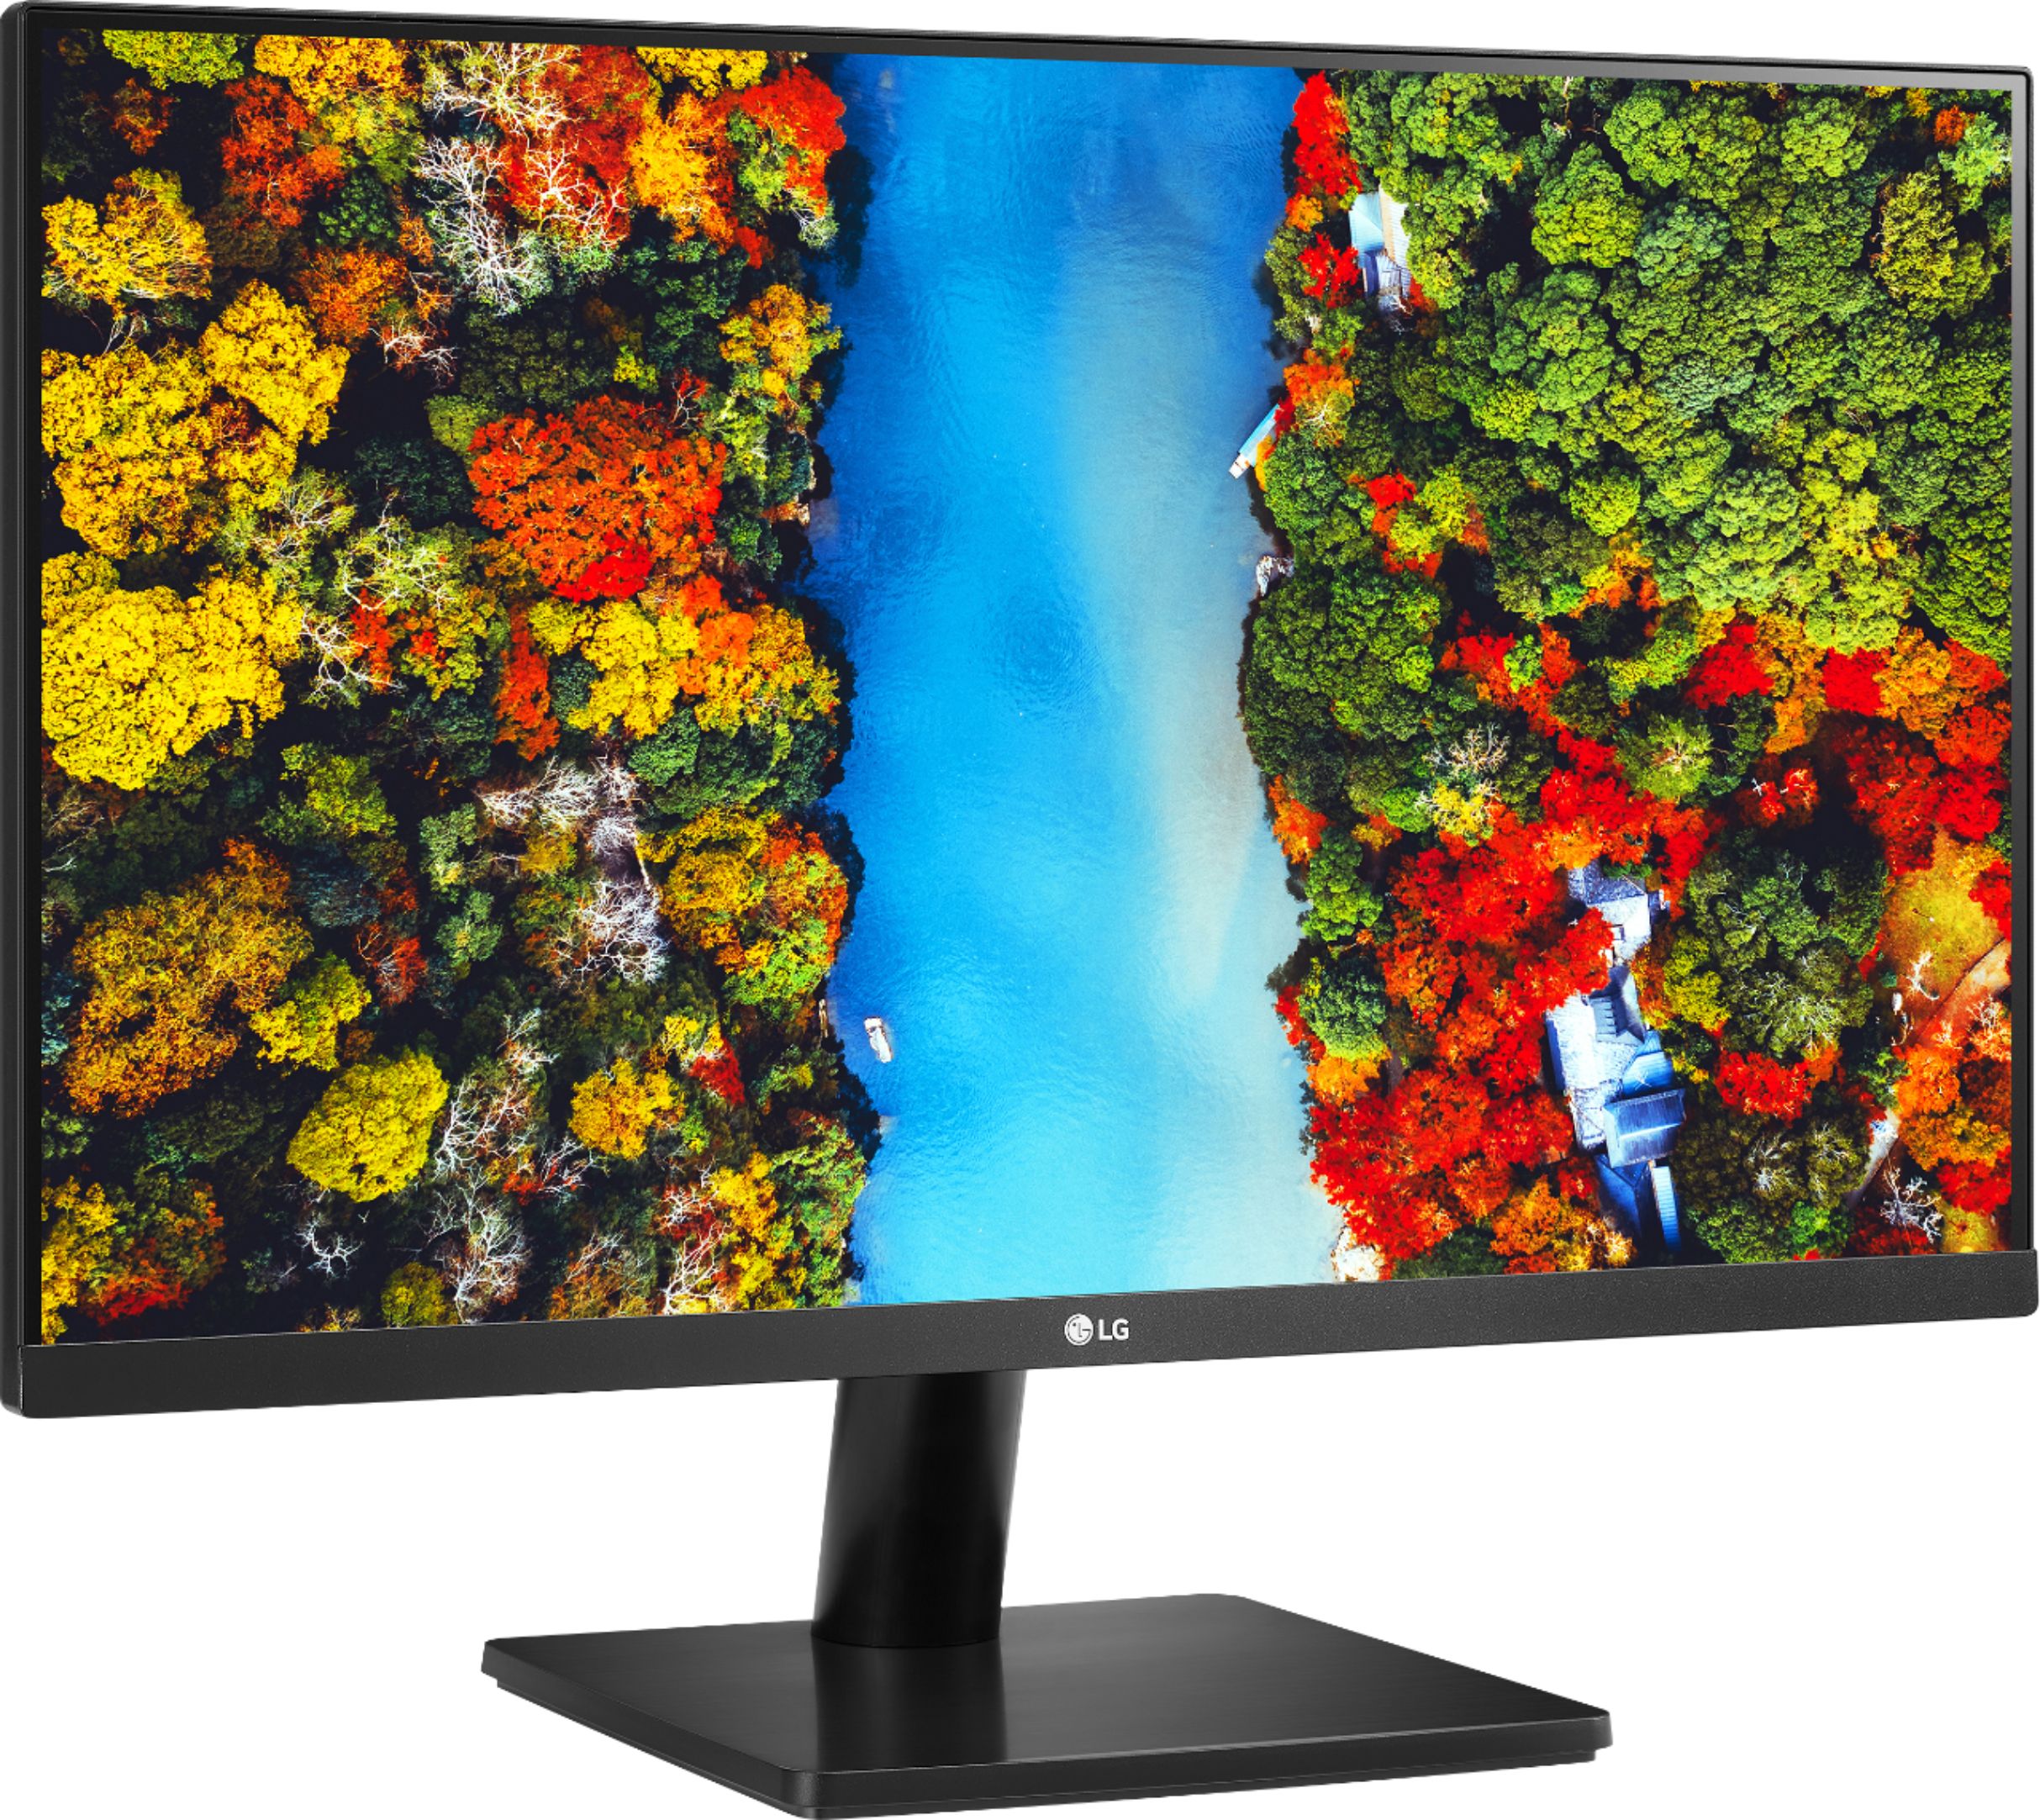 Angle View: Mobile Pixels - DUEX Max DS 14.1" IPS LCD Monitor - Black